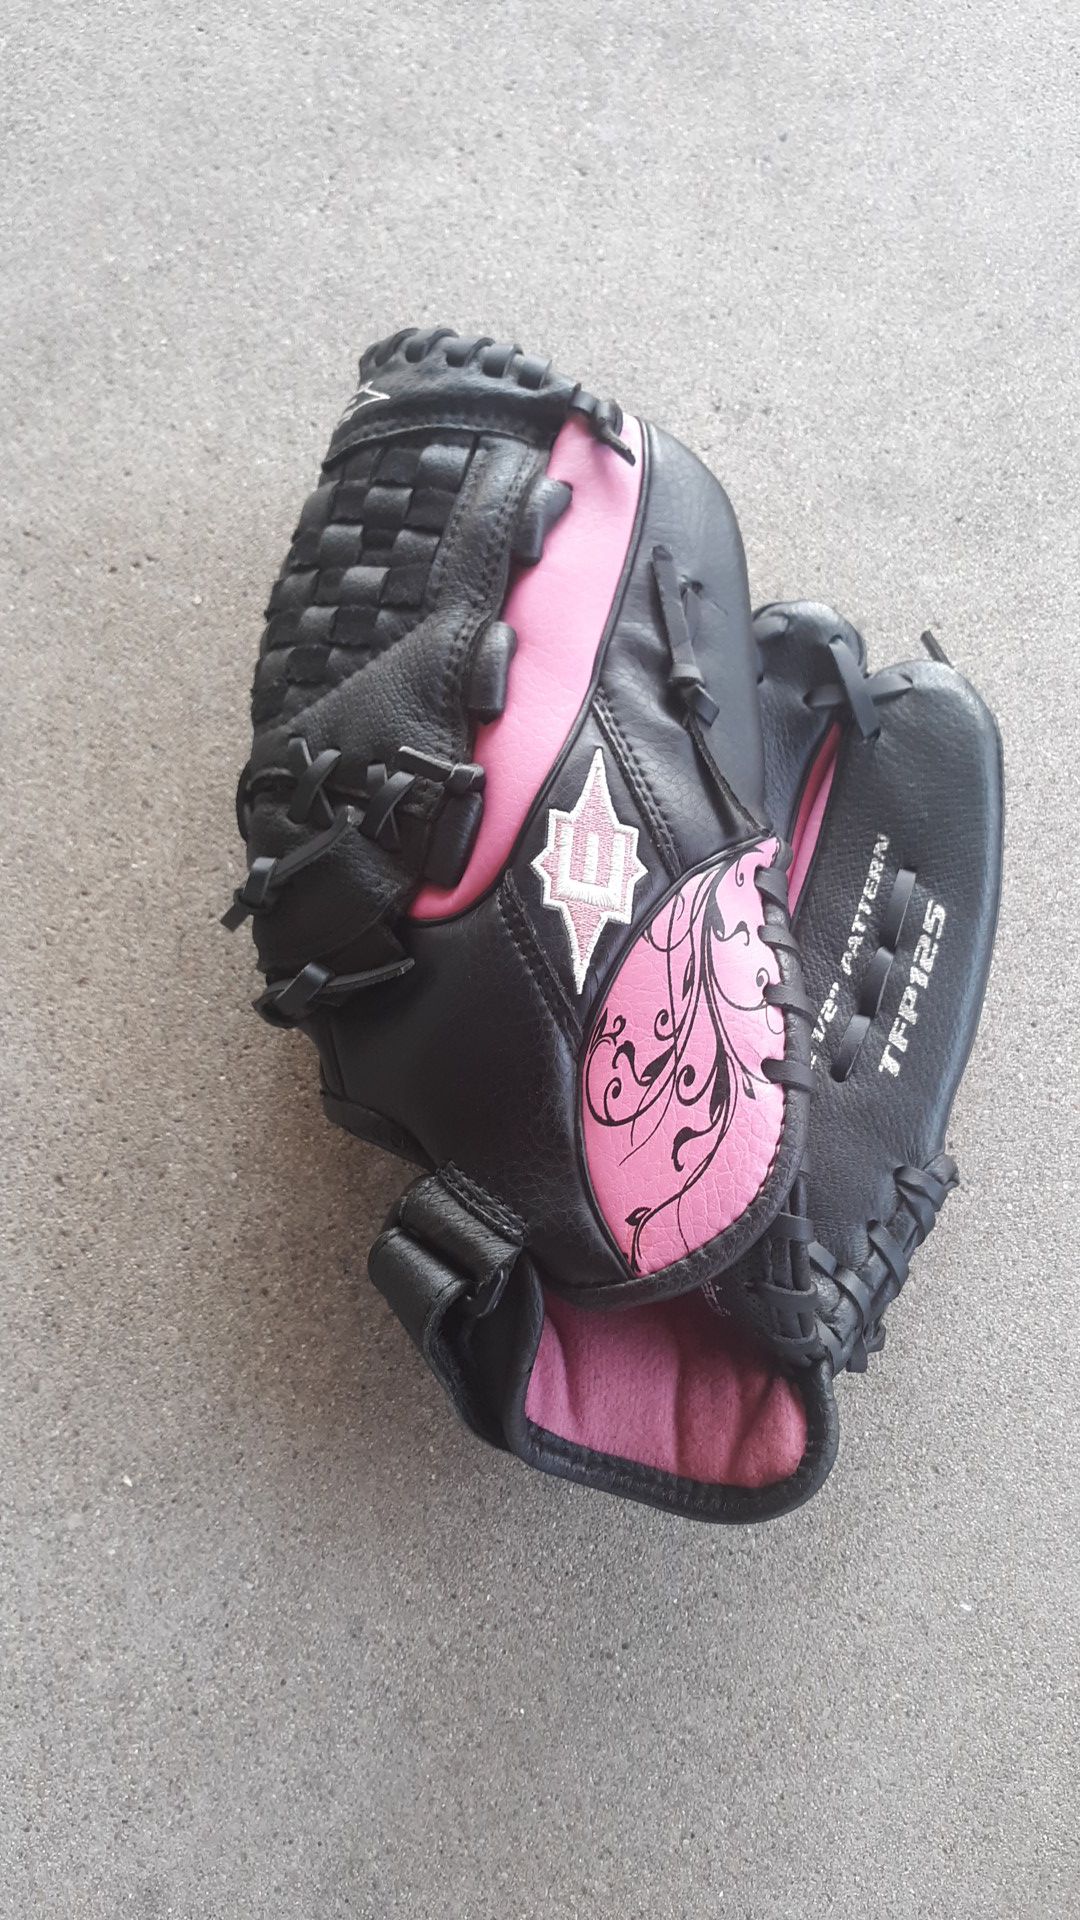 Brand new Easton black and pink leather baseball glove never used only 25$